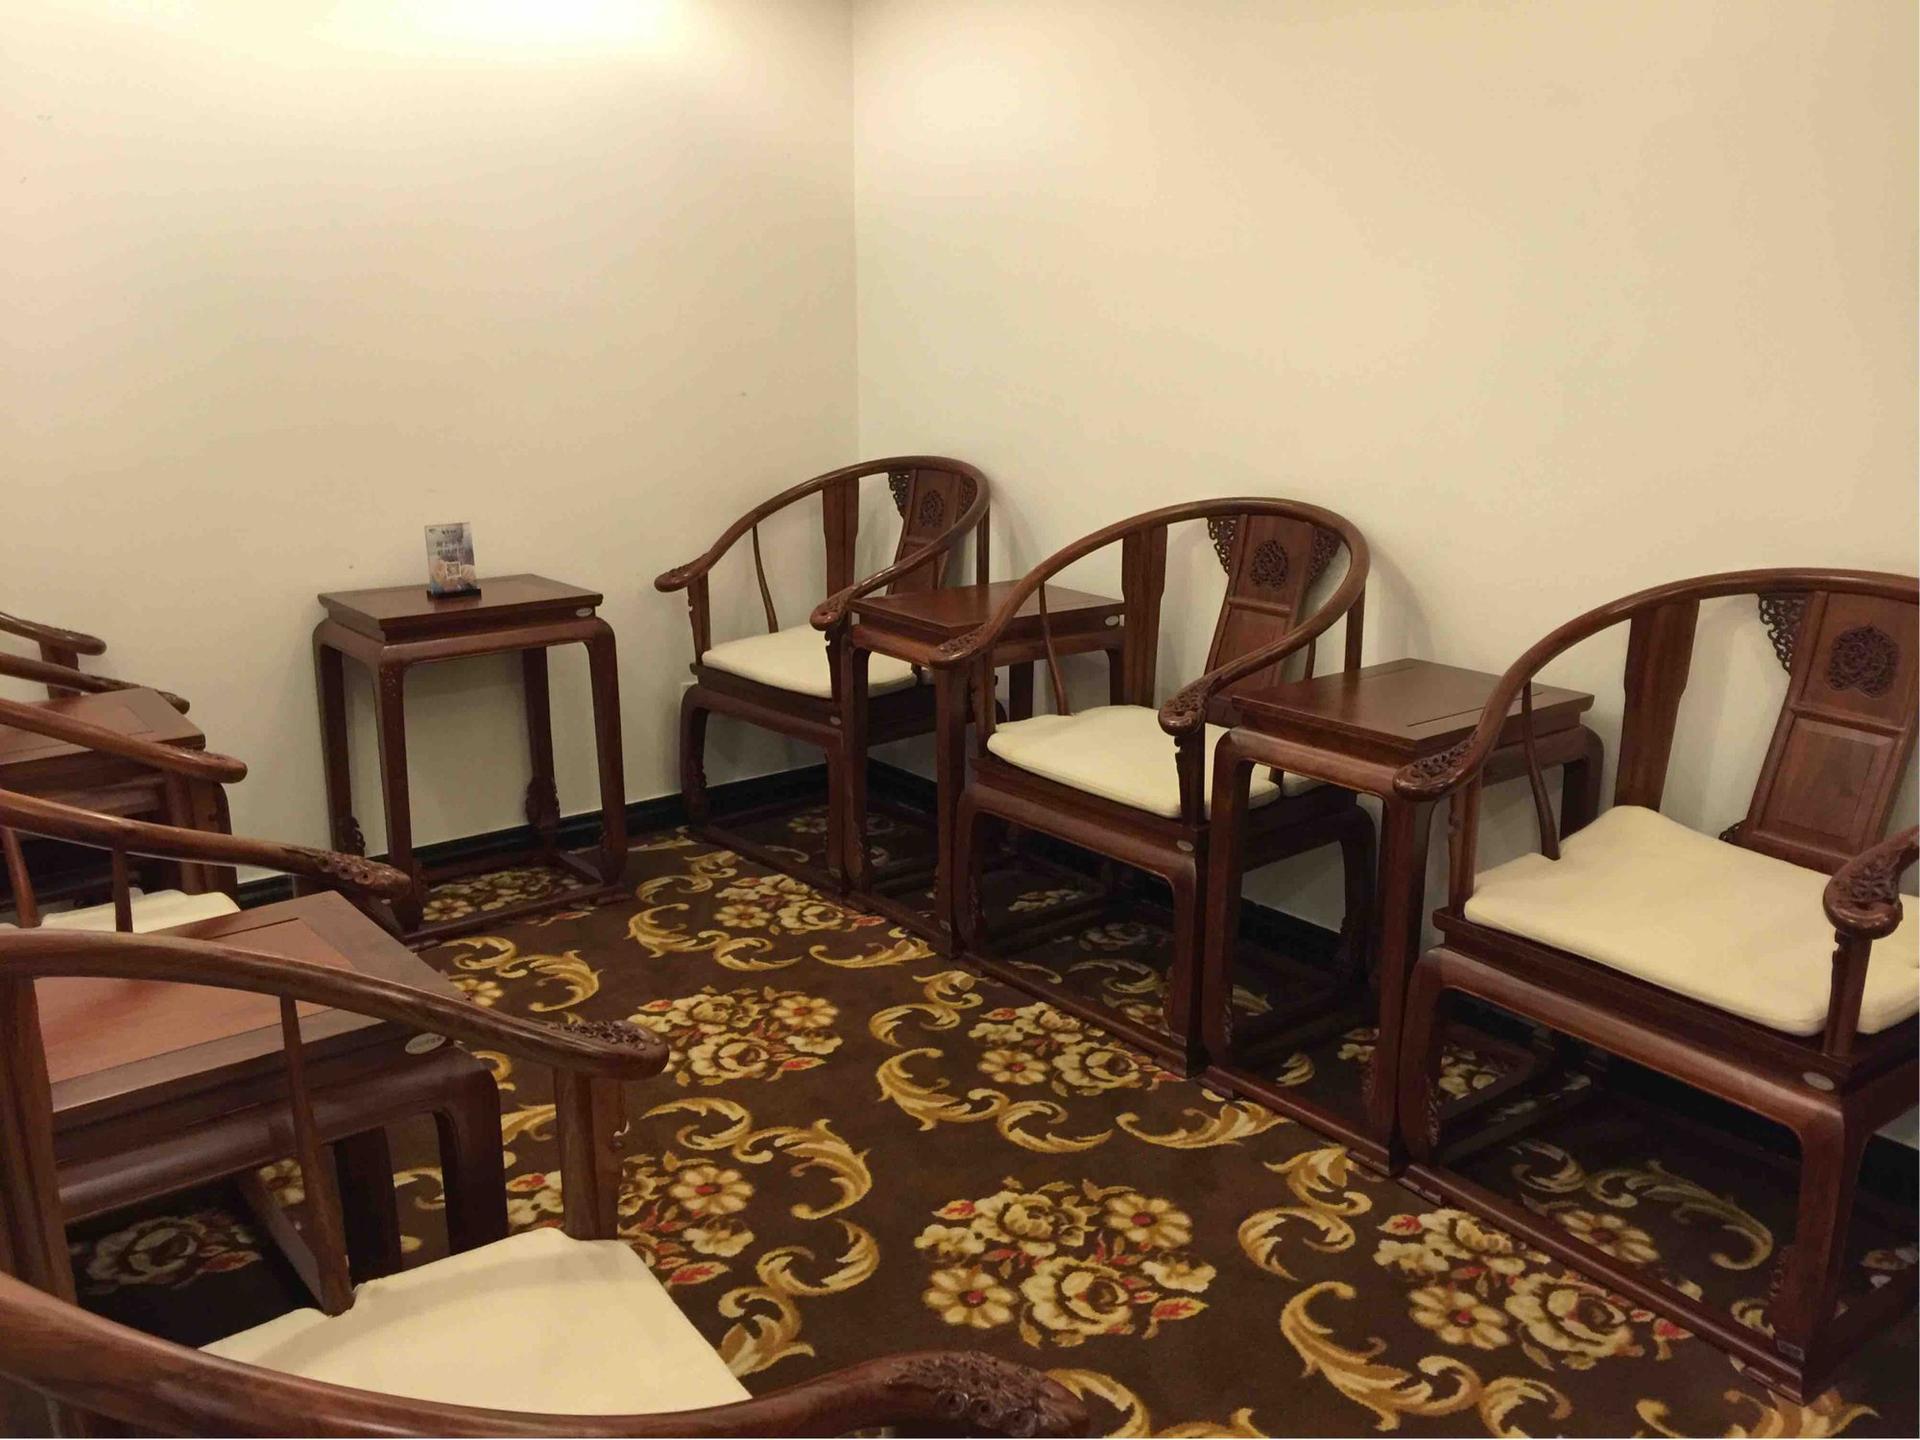 Baiyun Airport First Class Lounge (Closed For Renovation) image 9 of 11